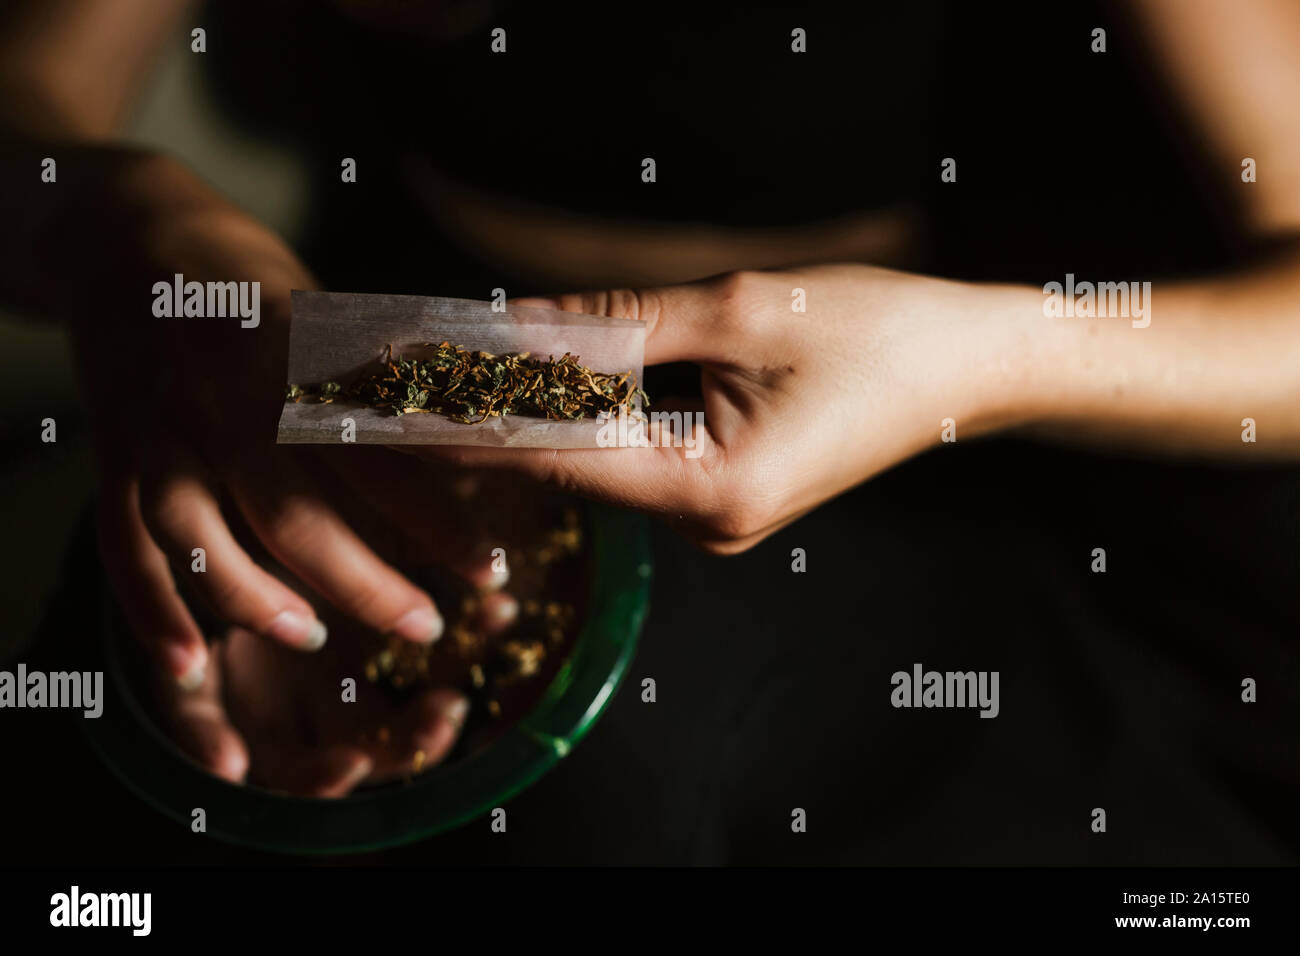 Young woman rolling a joint at home Stock Photo